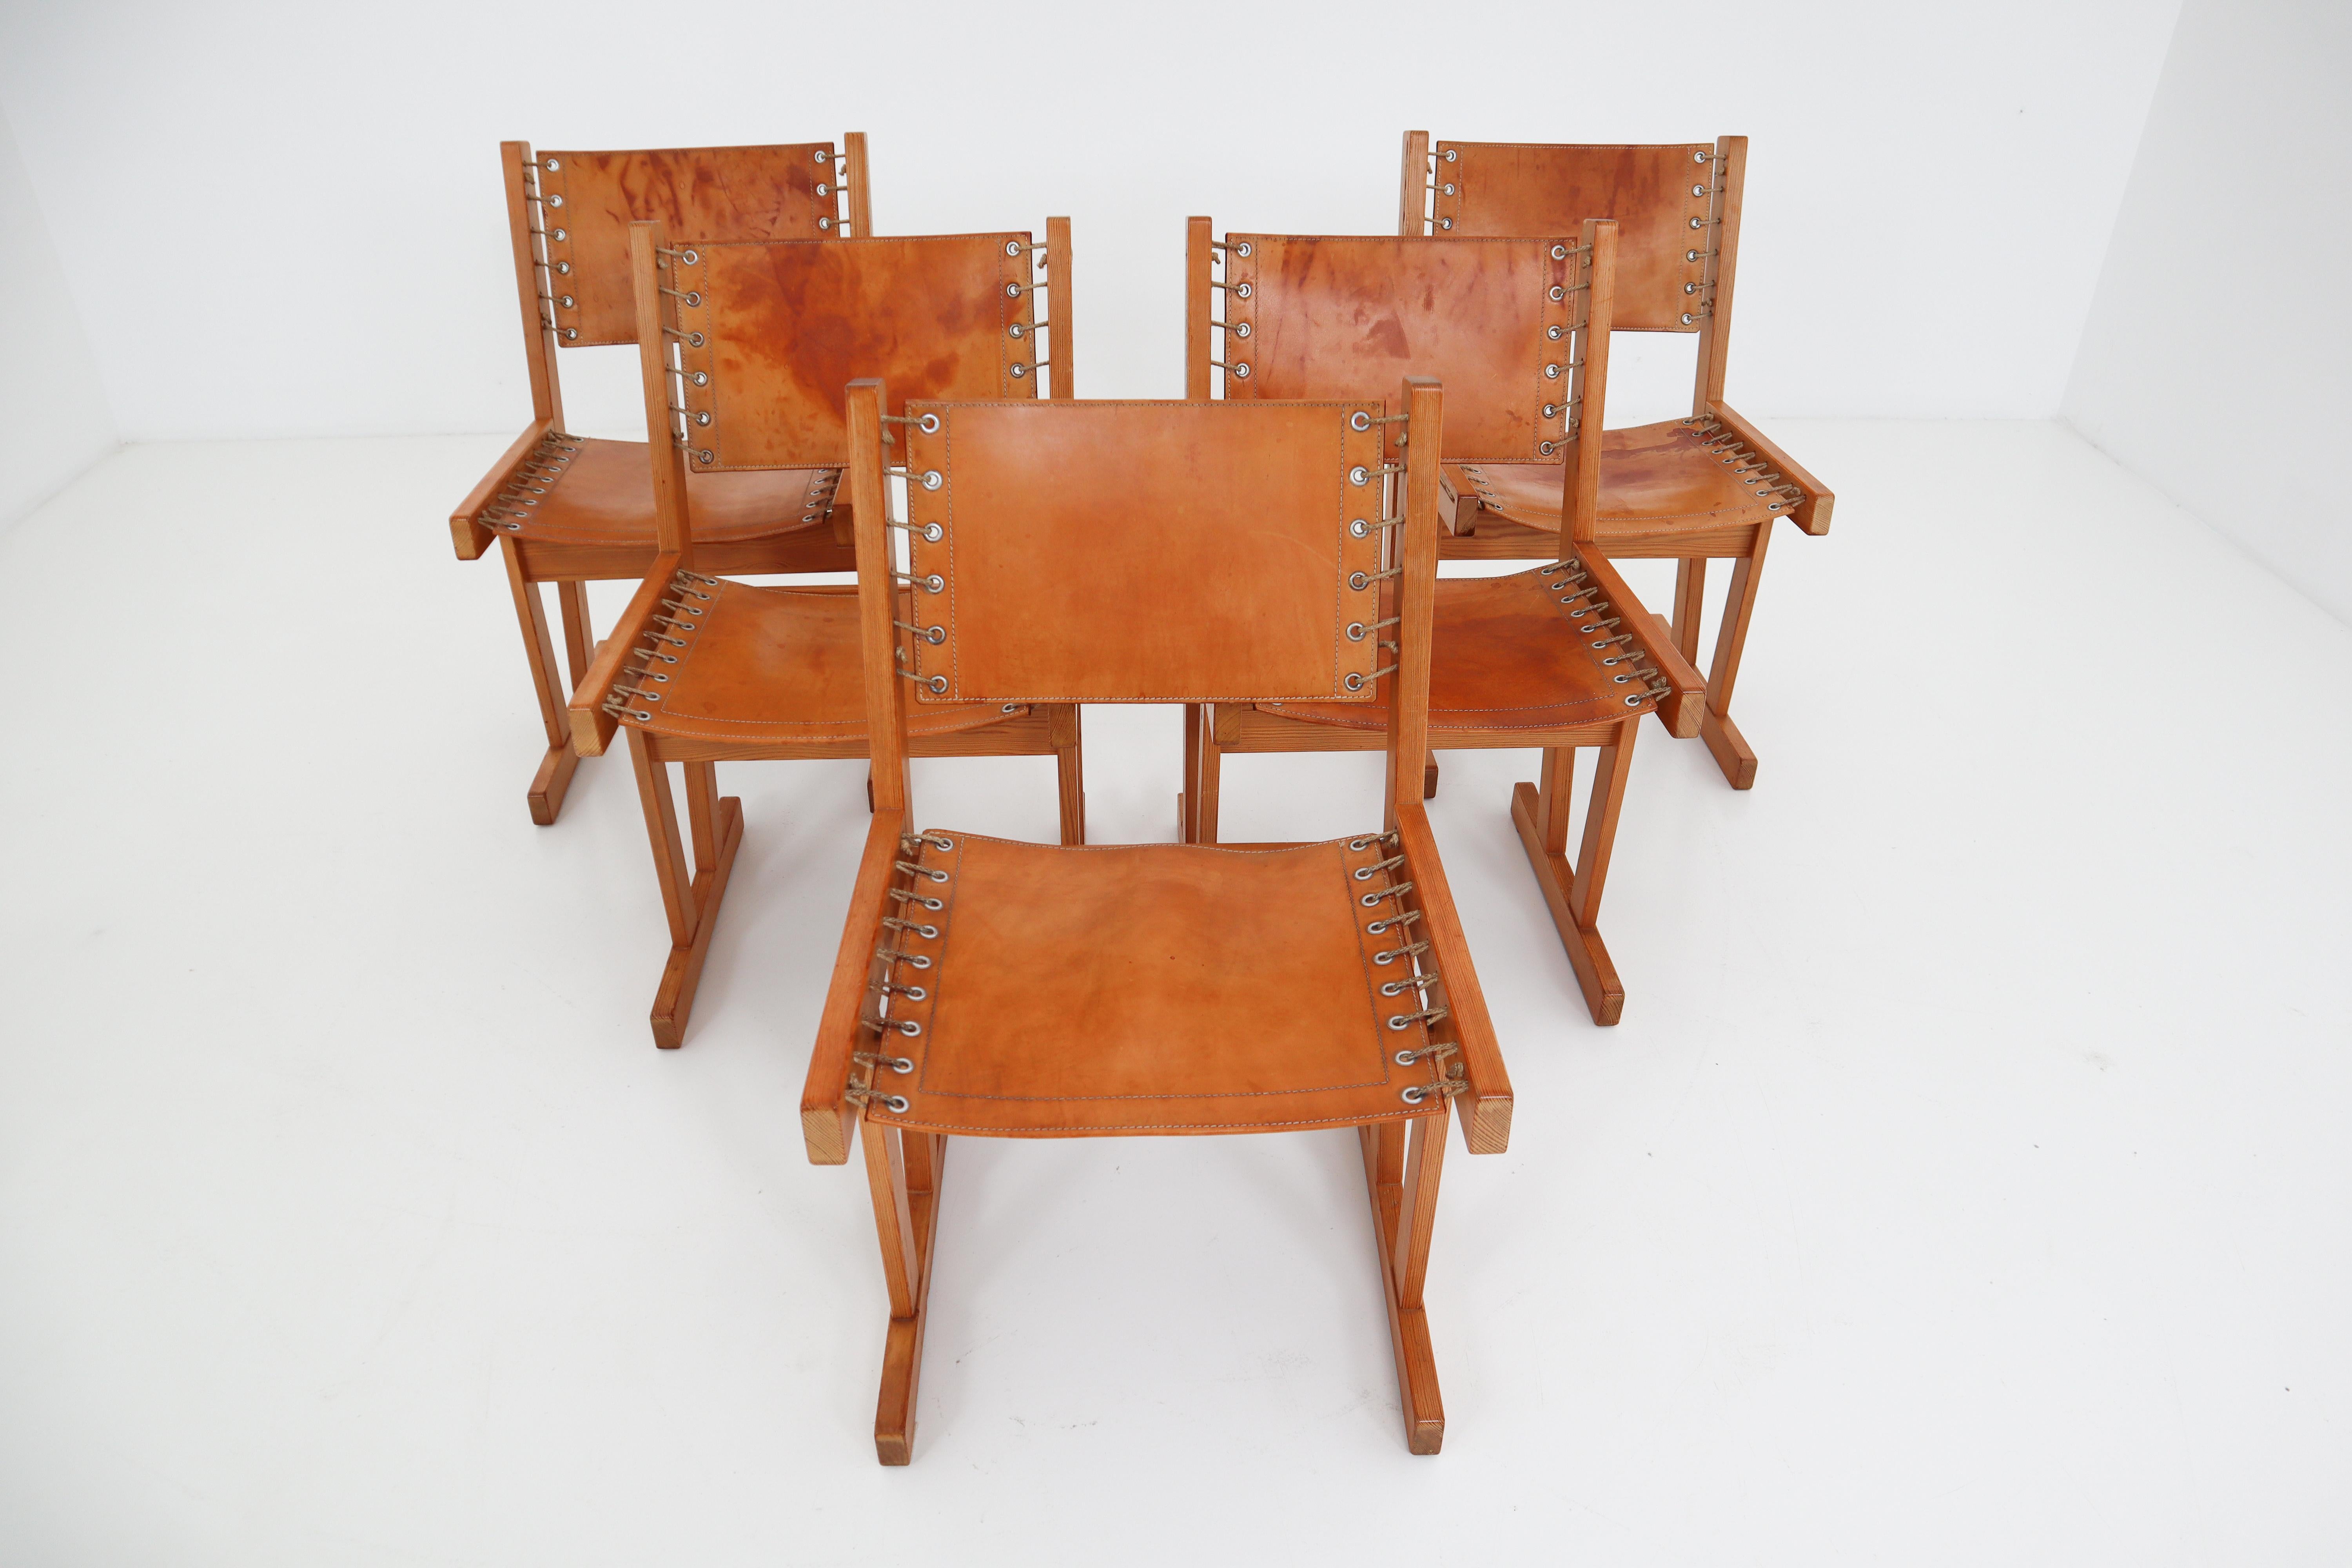 Midcentury Safari Chairs in Thick Cognac Saddle Leather and Solid Pine Wood 5